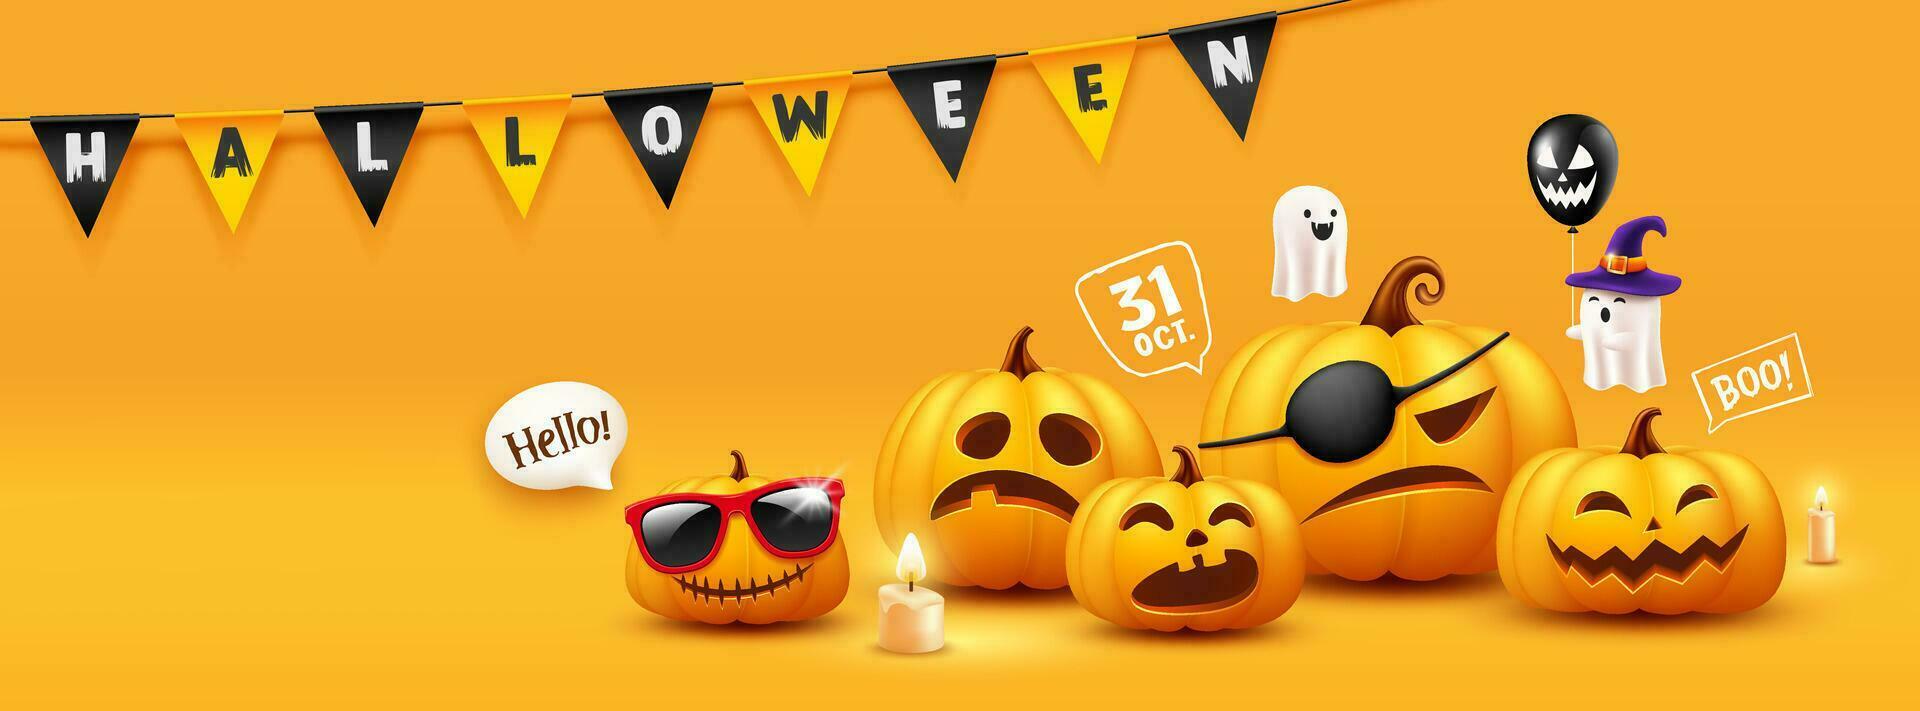 Happy Halloween, Pumpkins face action, smiling and scary face collections, pennant colorful flag , banner design on yellow background, Eps 10 vector illustration